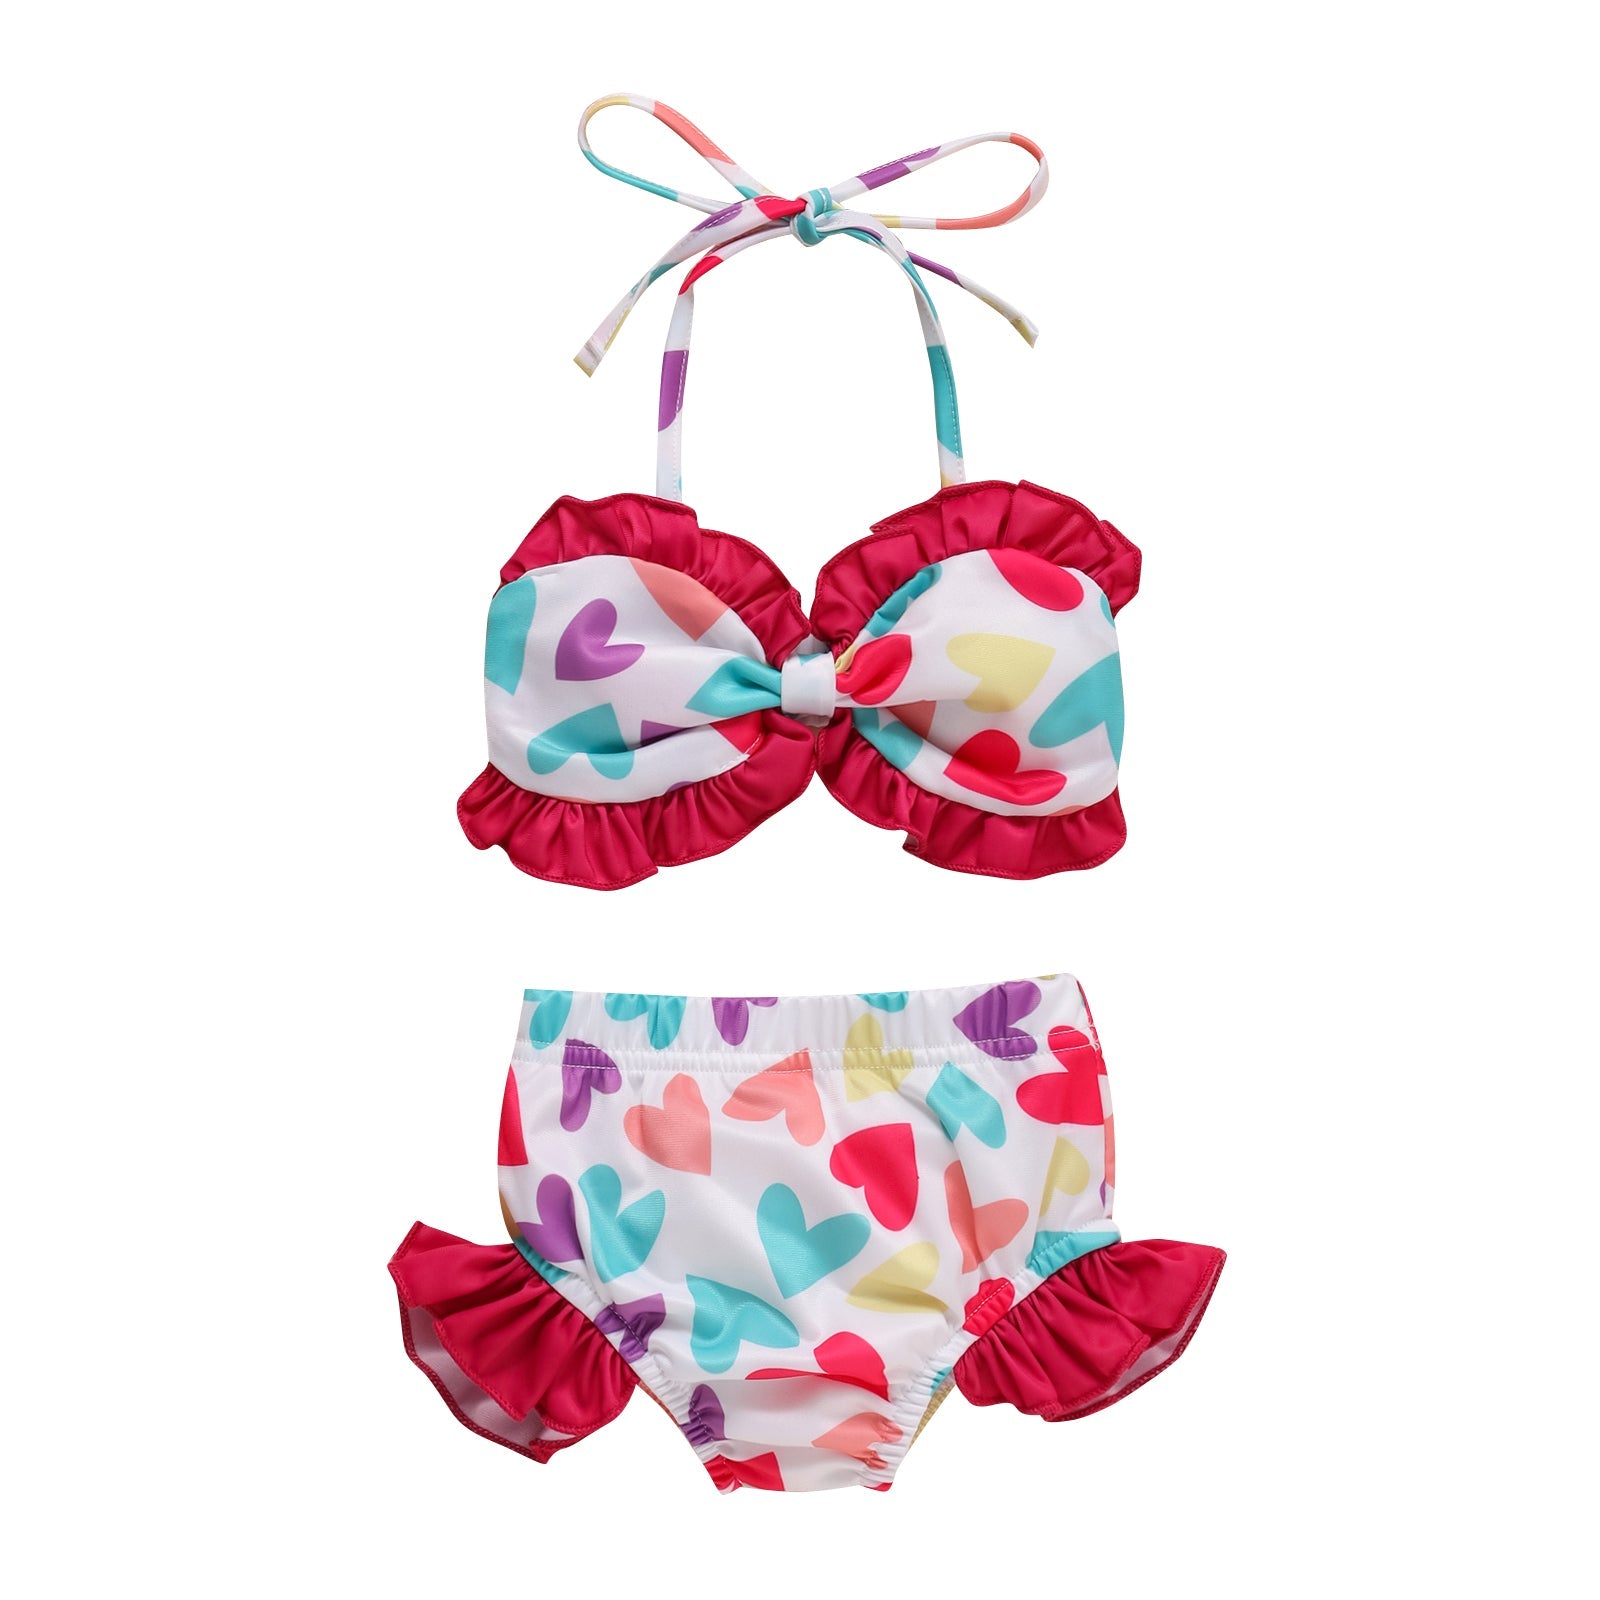 2-Piece Heart Printed Swimsuit.